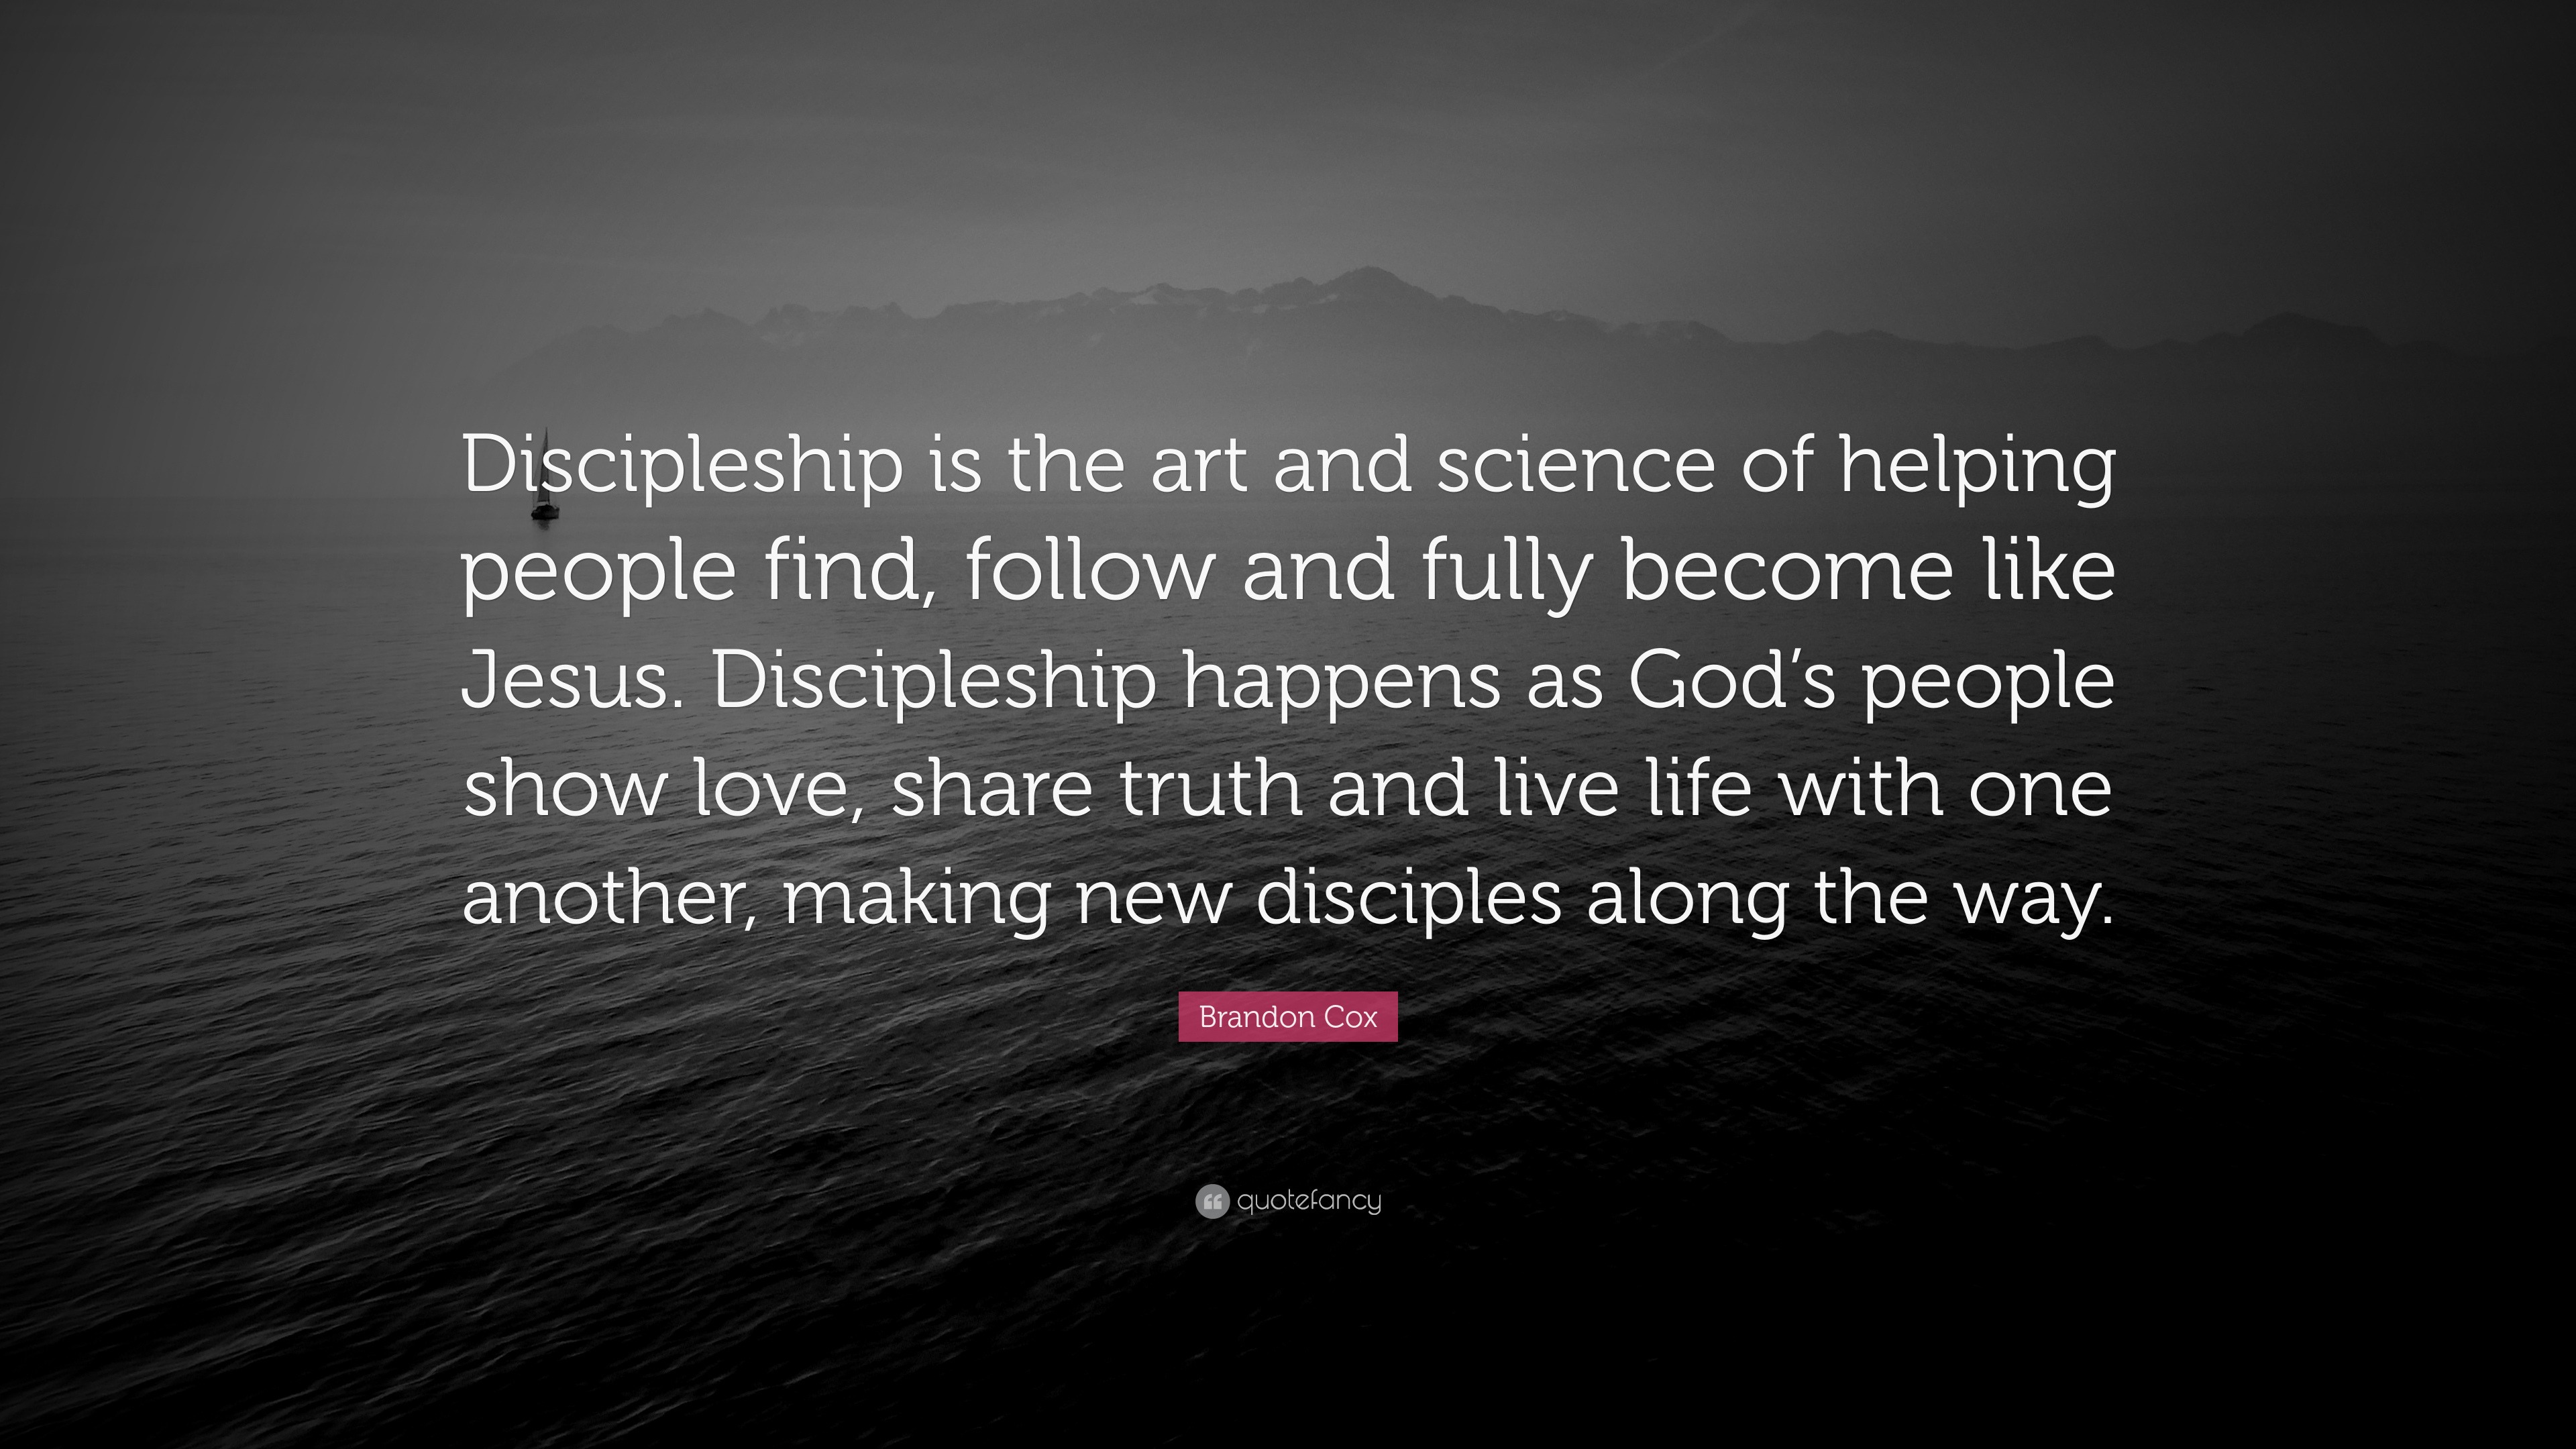 Brandon Cox Quote: "Discipleship is the art and science of helping people find, follow and fully ...